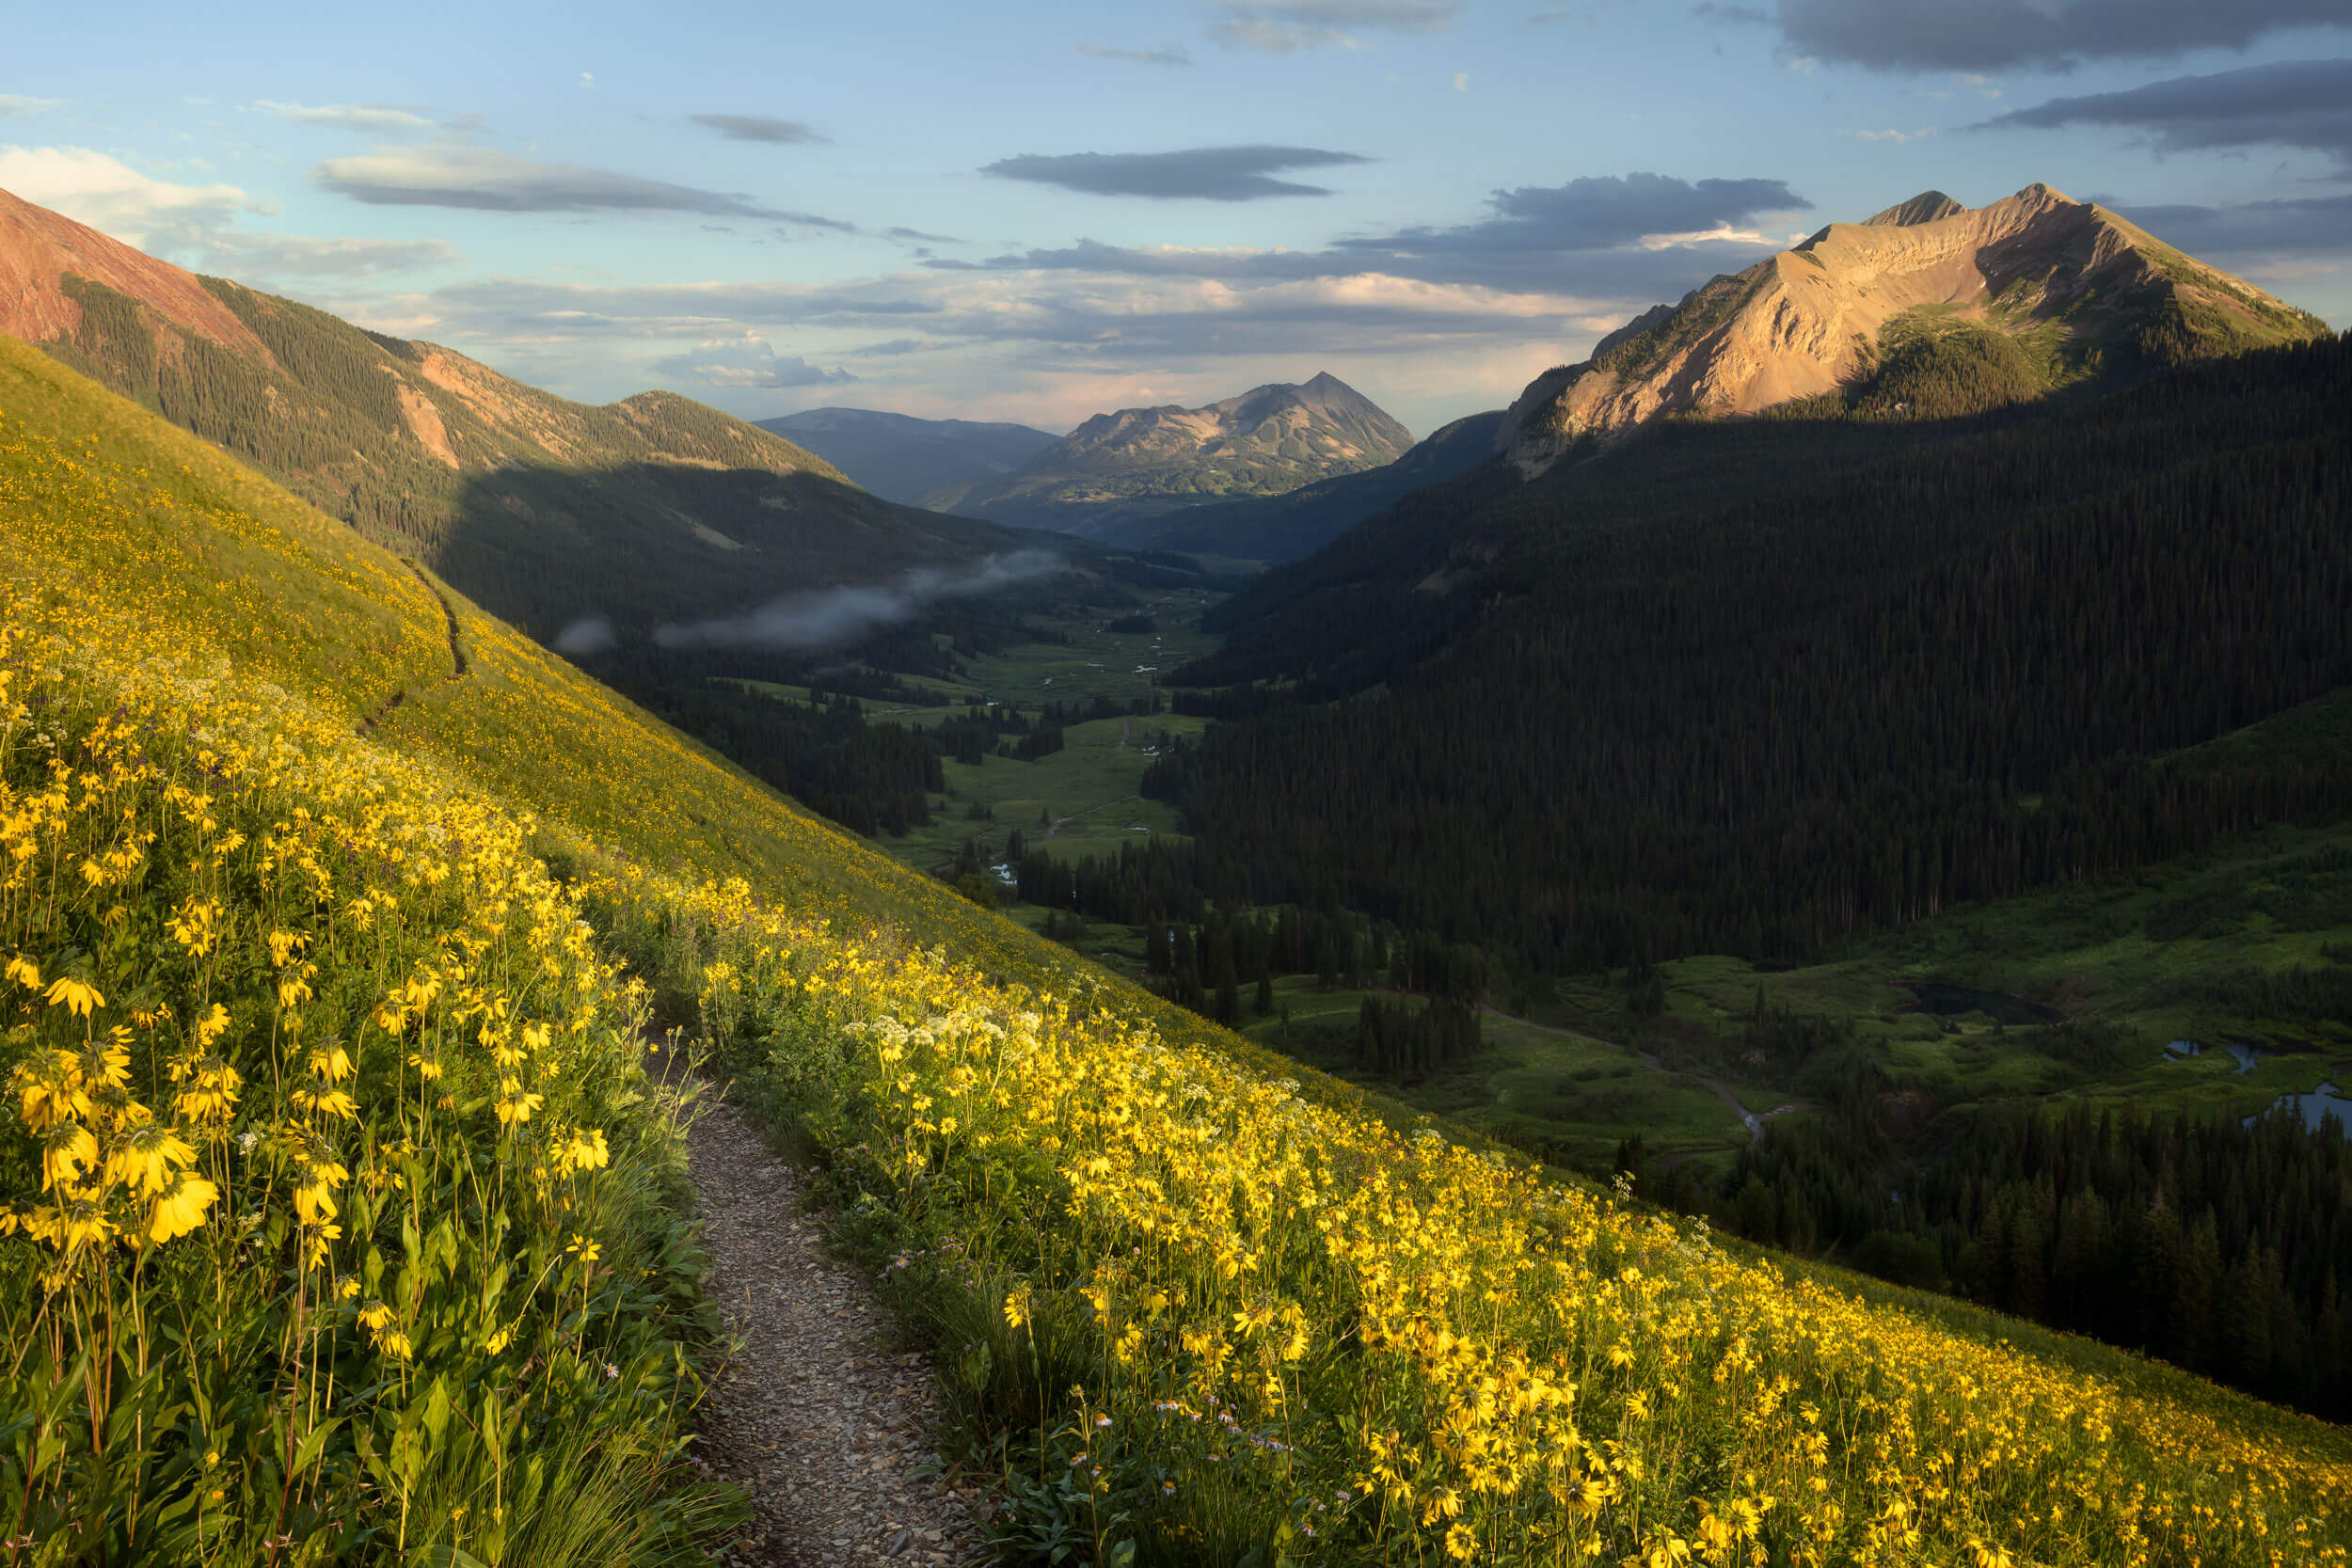 A Crested Butte wildflower picture from the 401 Trail in Colorado.